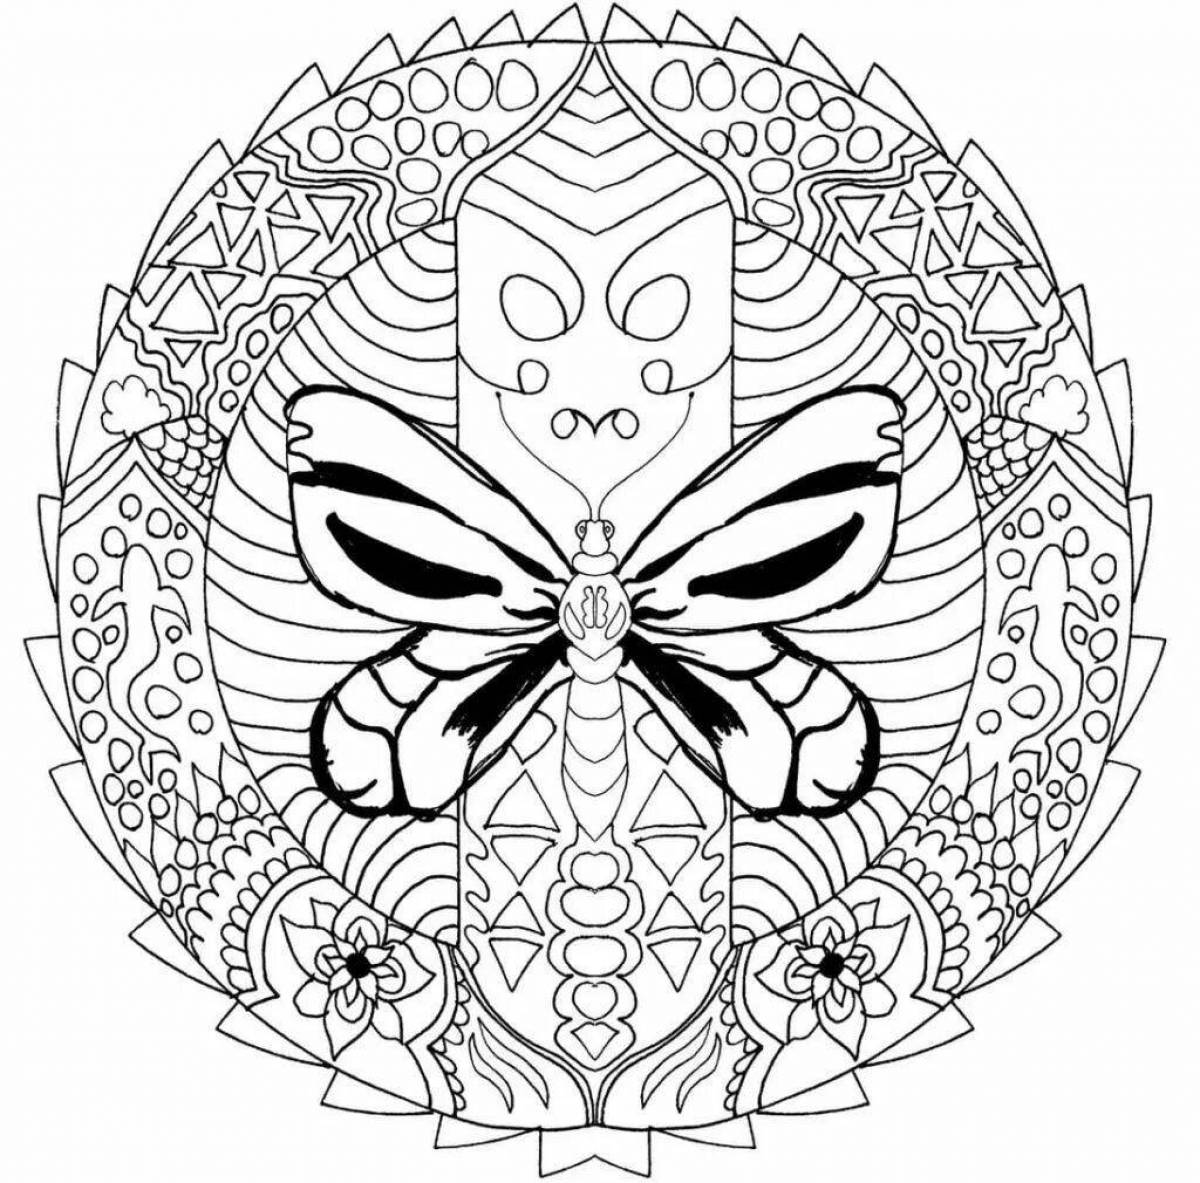 Inspirational Anti-stress Mandala Coloring Pages for Adults en